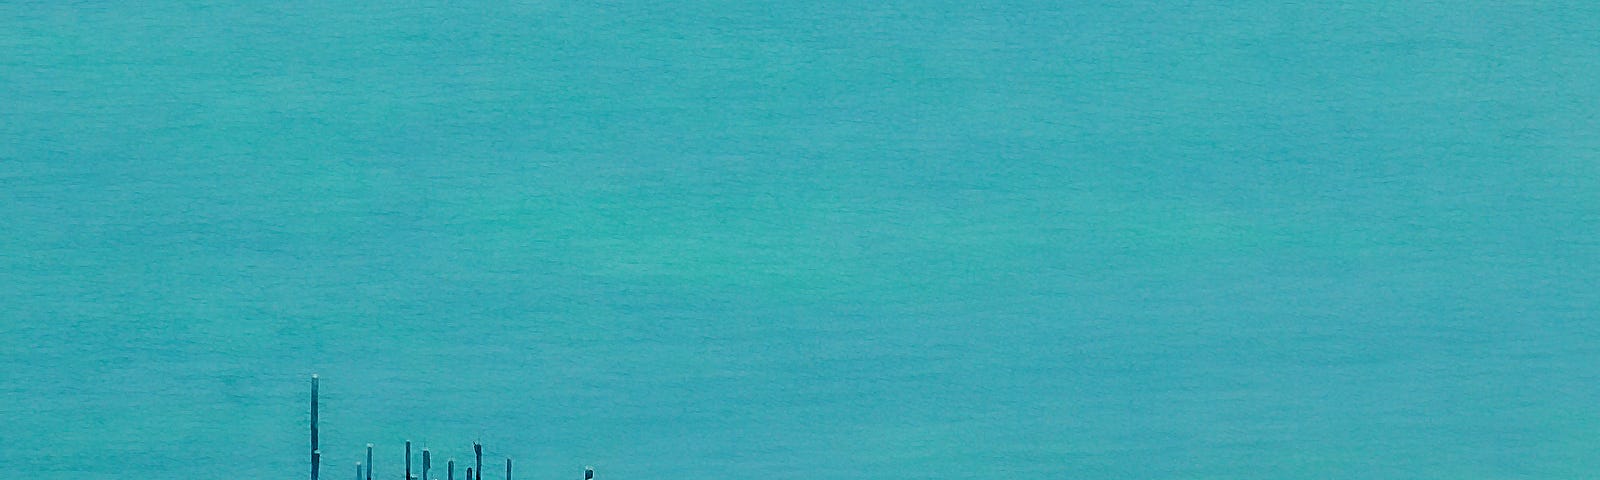 inaccessible old wooden pier in turquoise blue waters, love story, soulmates, death | © pockett dessert, love’s edge